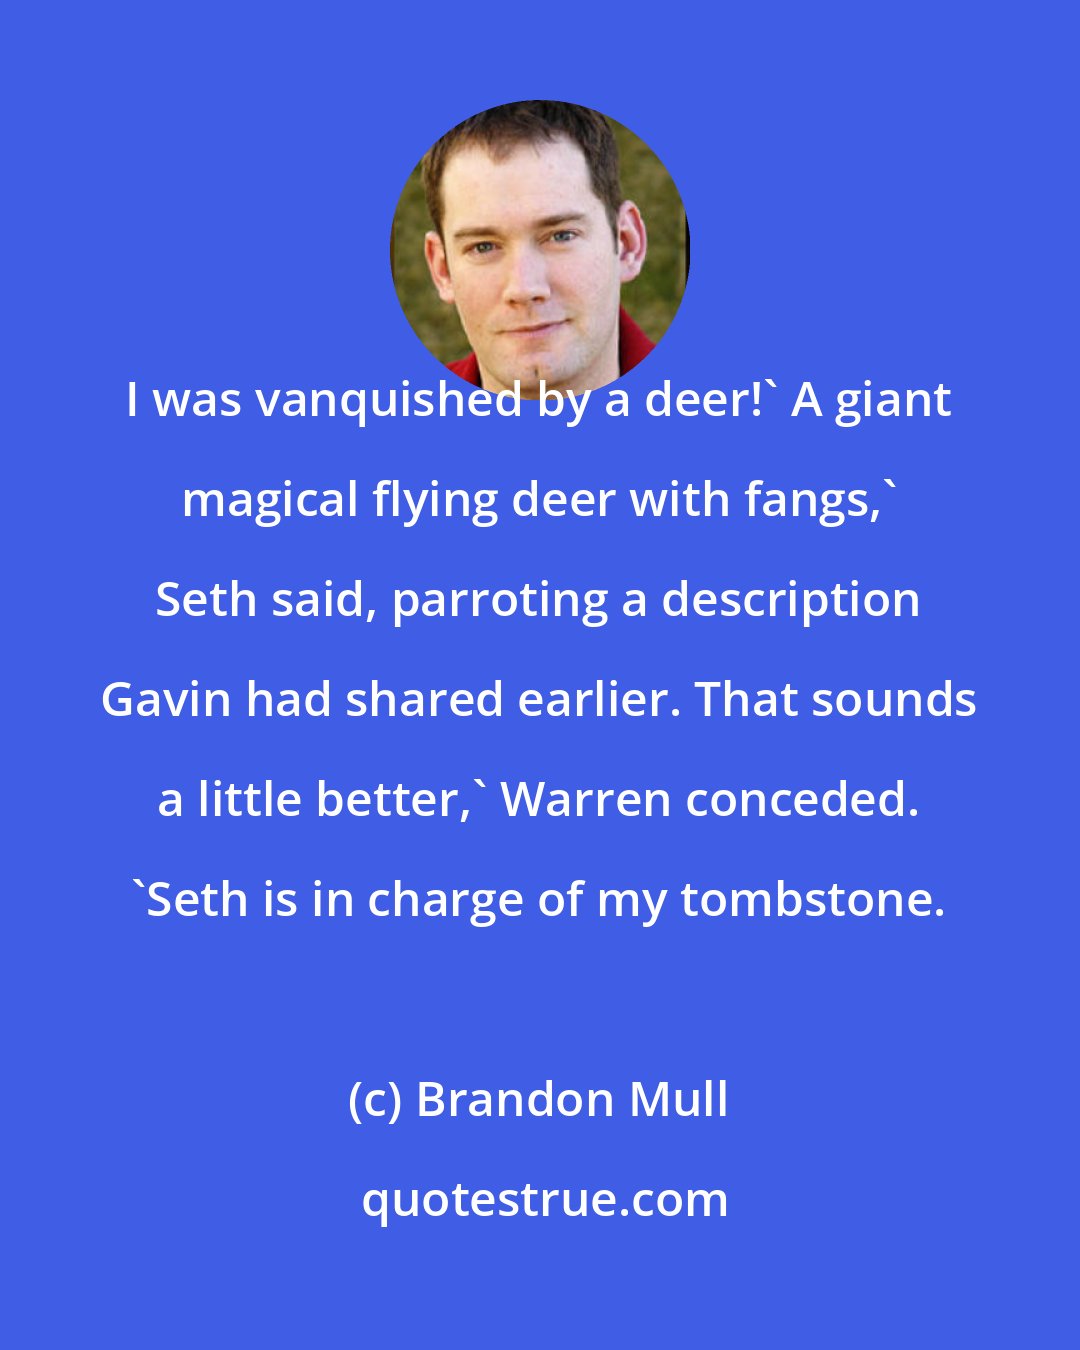 Brandon Mull: I was vanquished by a deer!' A giant magical flying deer with fangs,' Seth said, parroting a description Gavin had shared earlier. That sounds a little better,' Warren conceded. 'Seth is in charge of my tombstone.